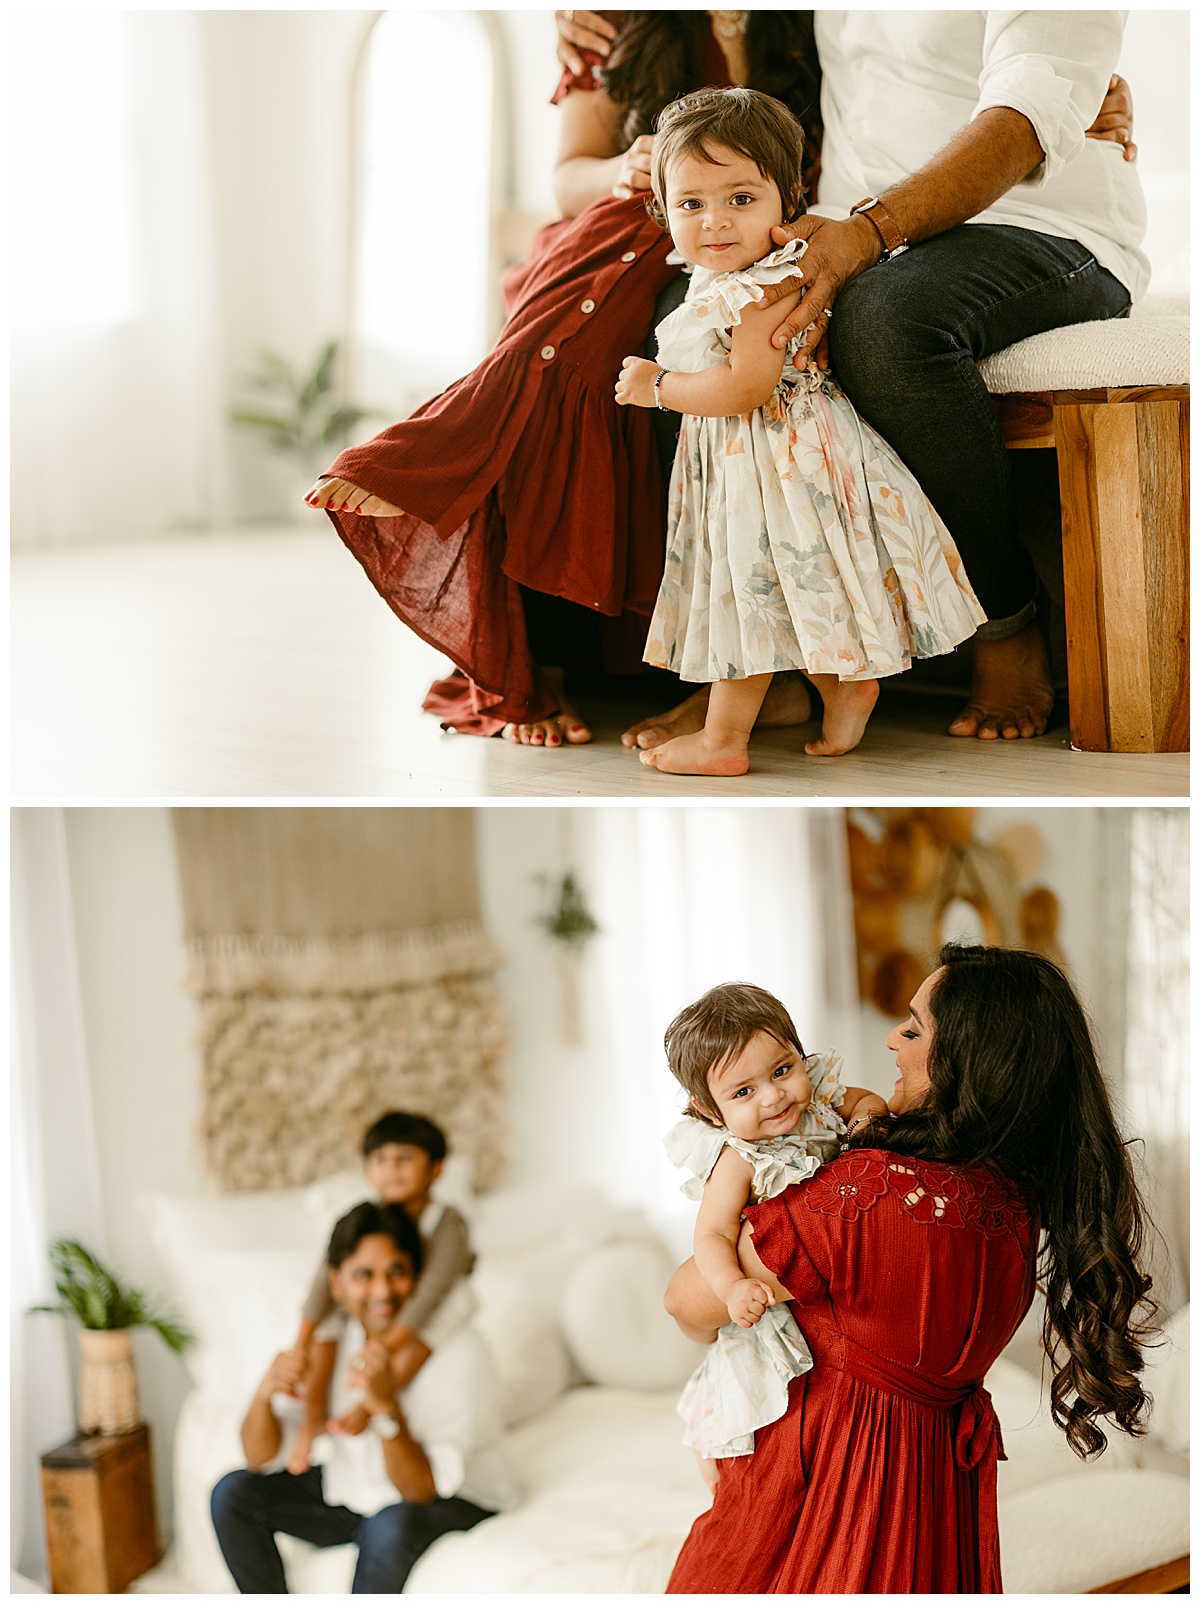 Mom dances and plays with children for Virginia Family Photographer